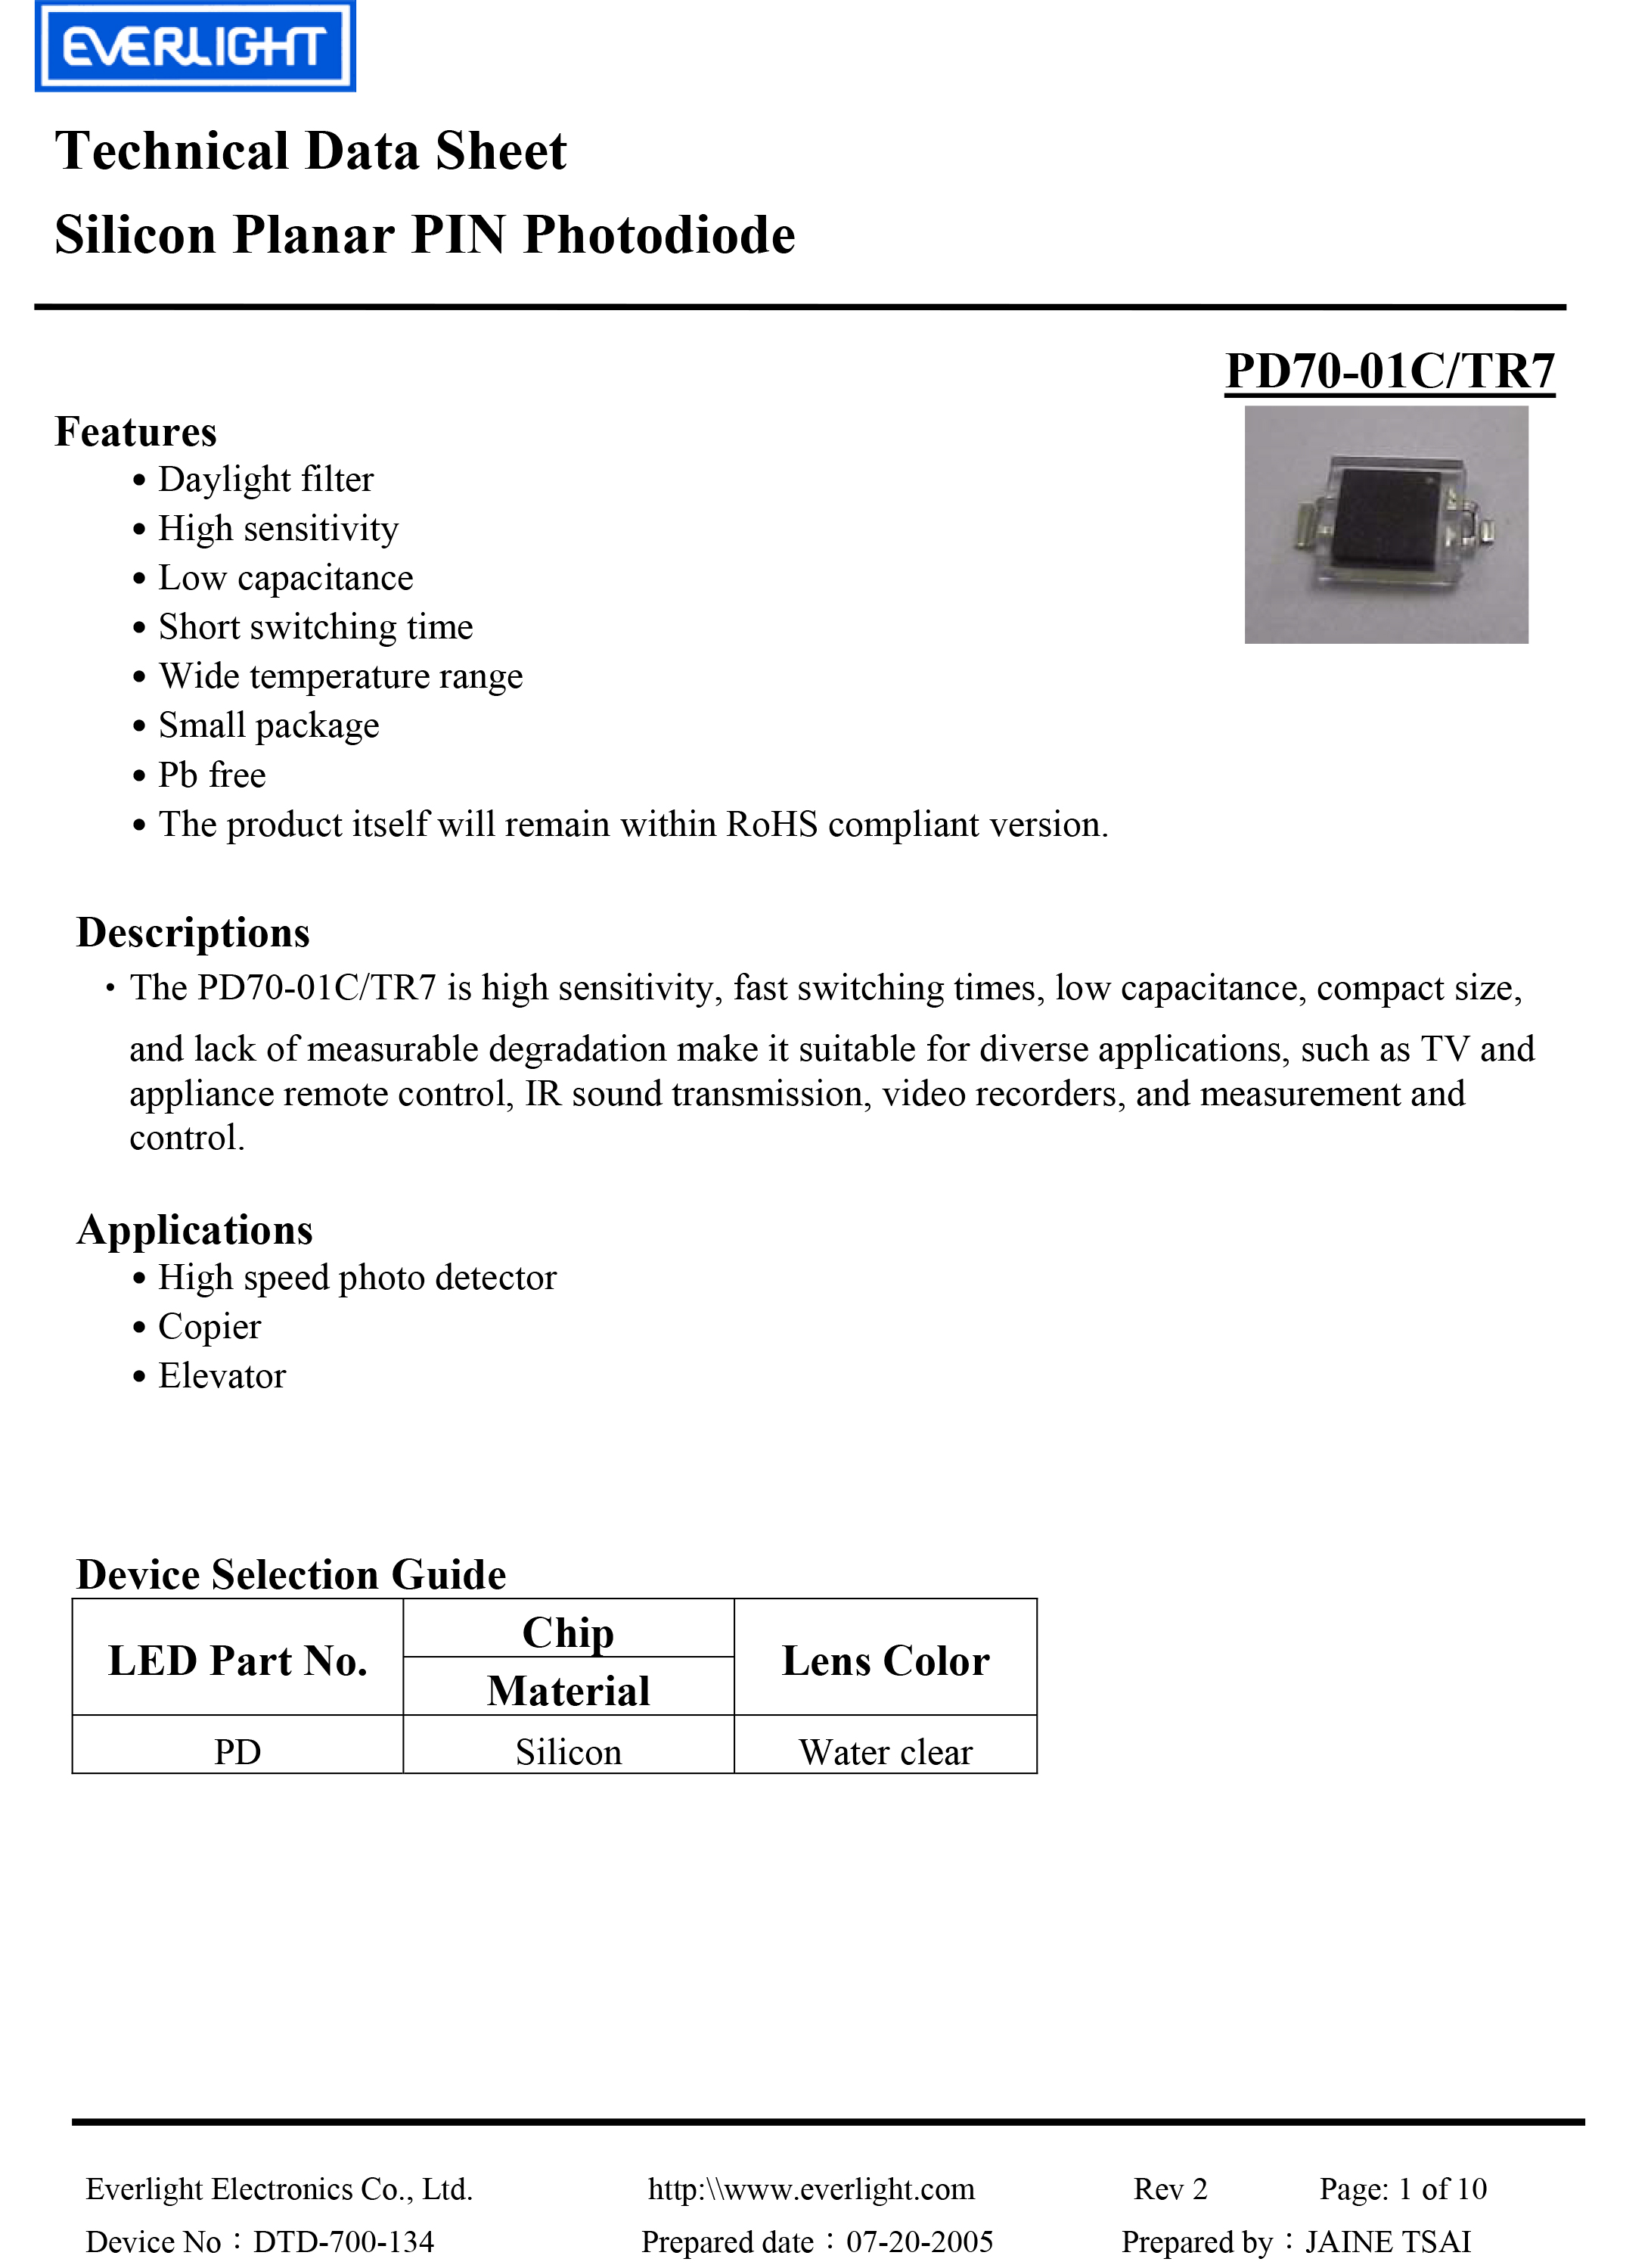 EVERLIGHT SMD PHOTO DIODE  PD70-01C-TR7 Datasheet